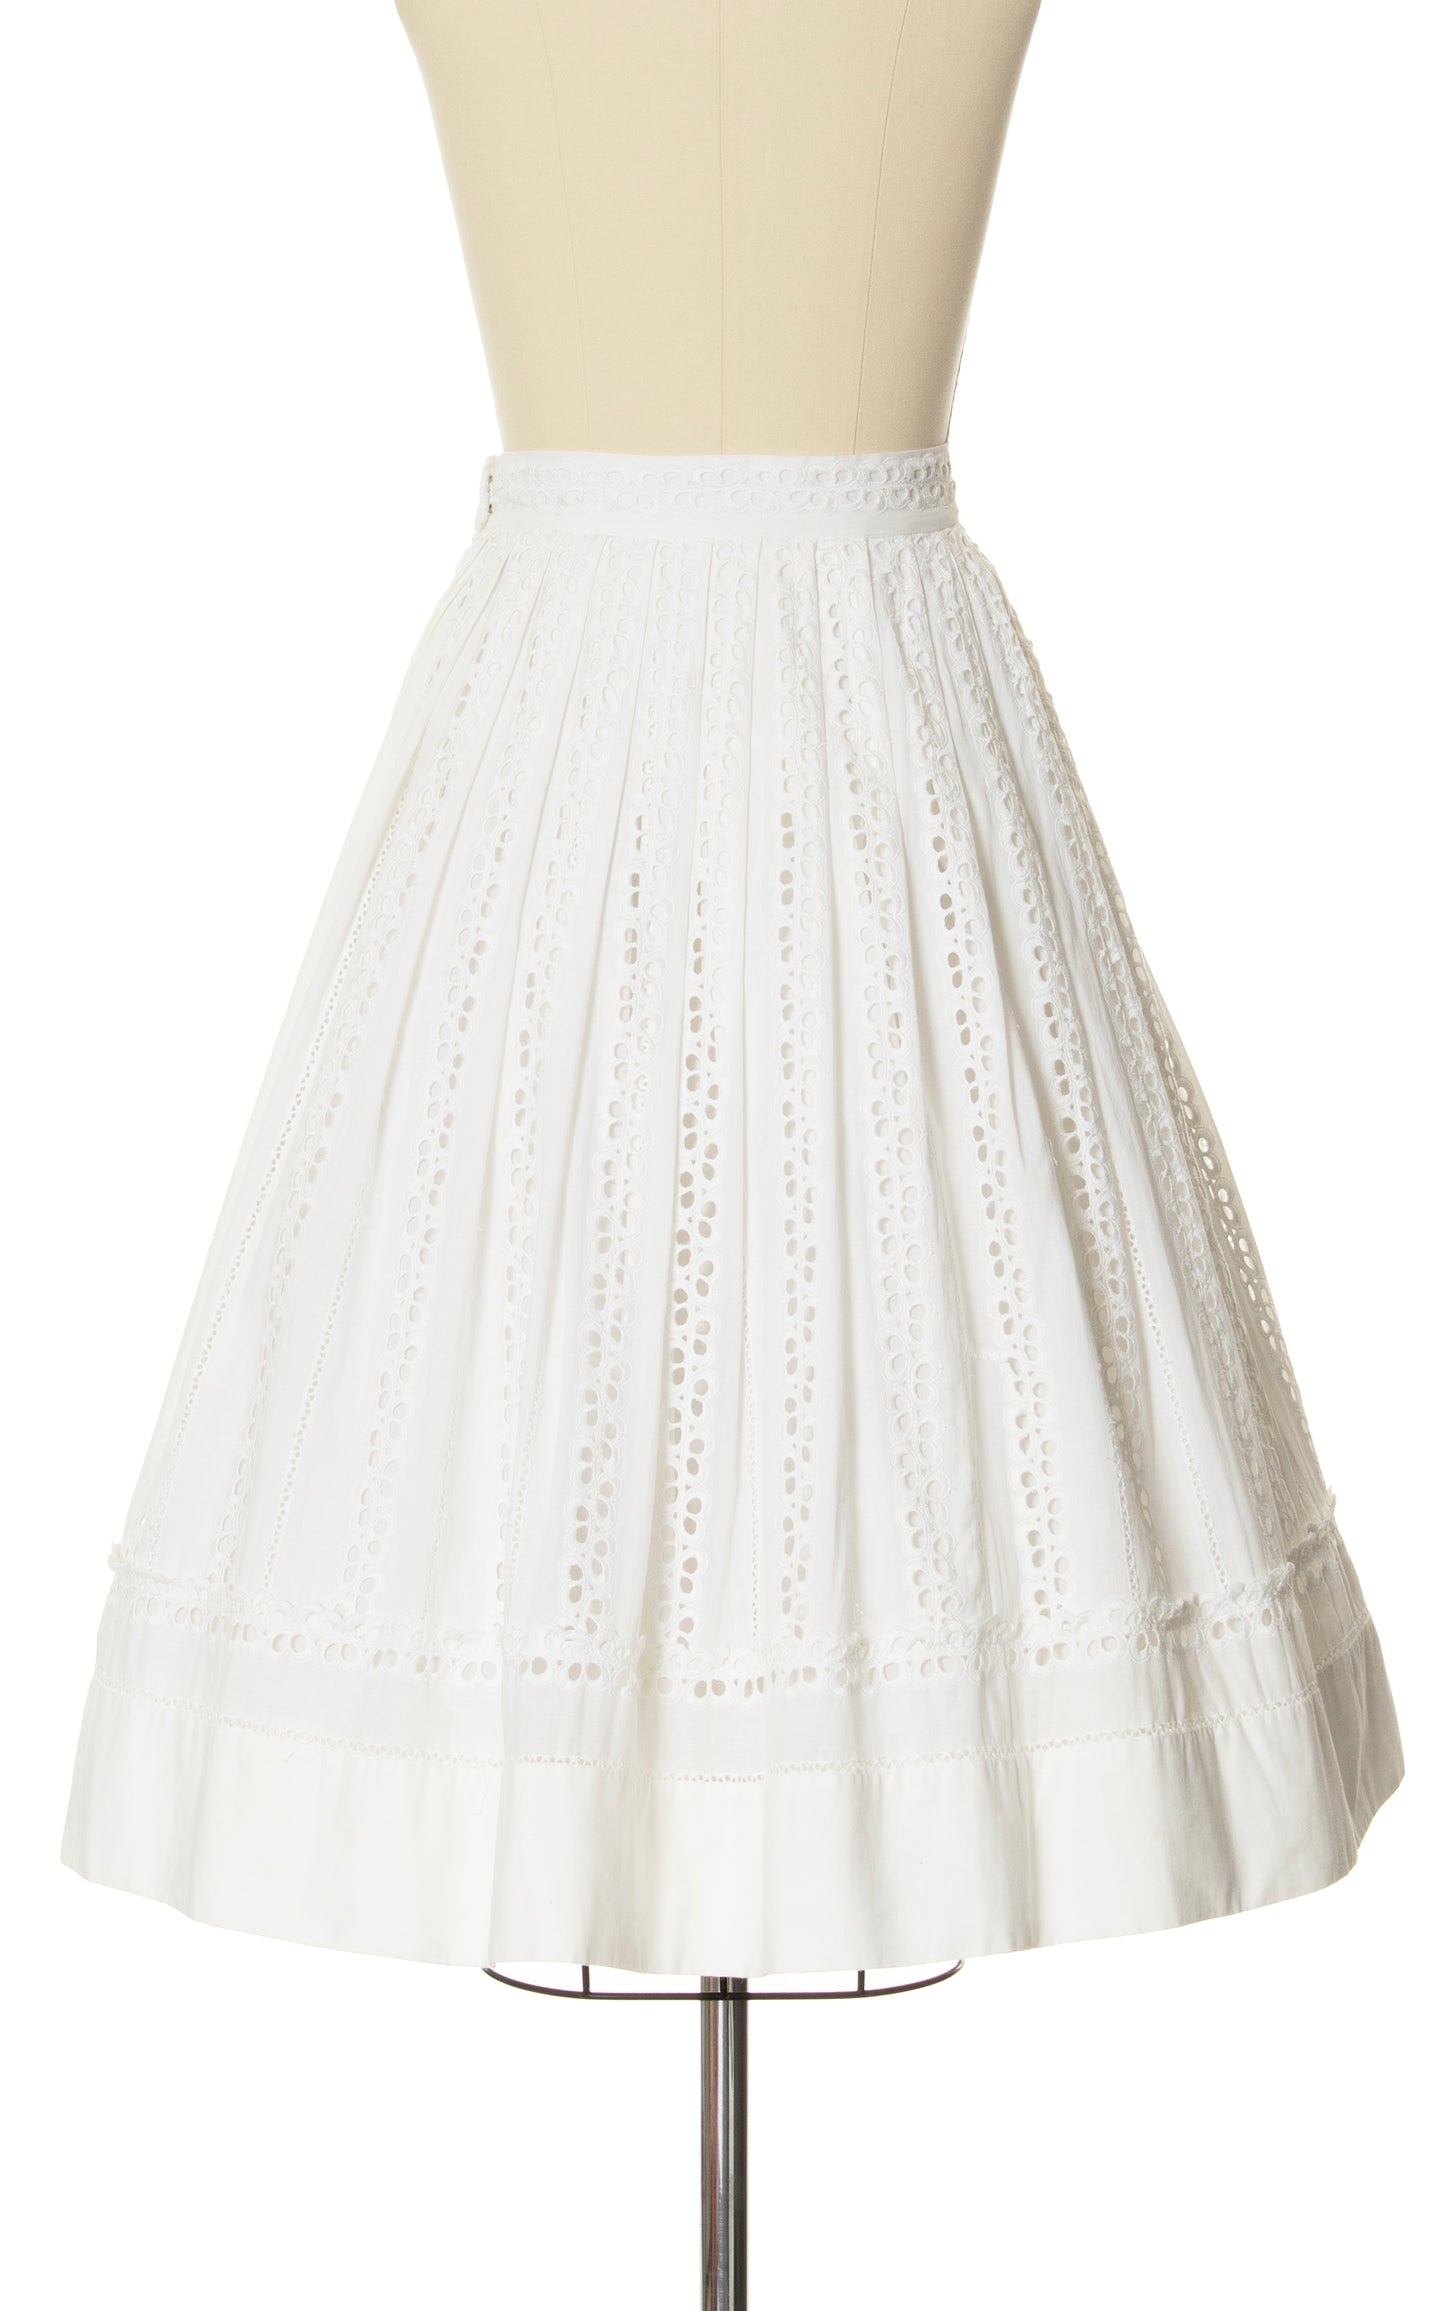 1950s White Eyelet Lace Skirt | small